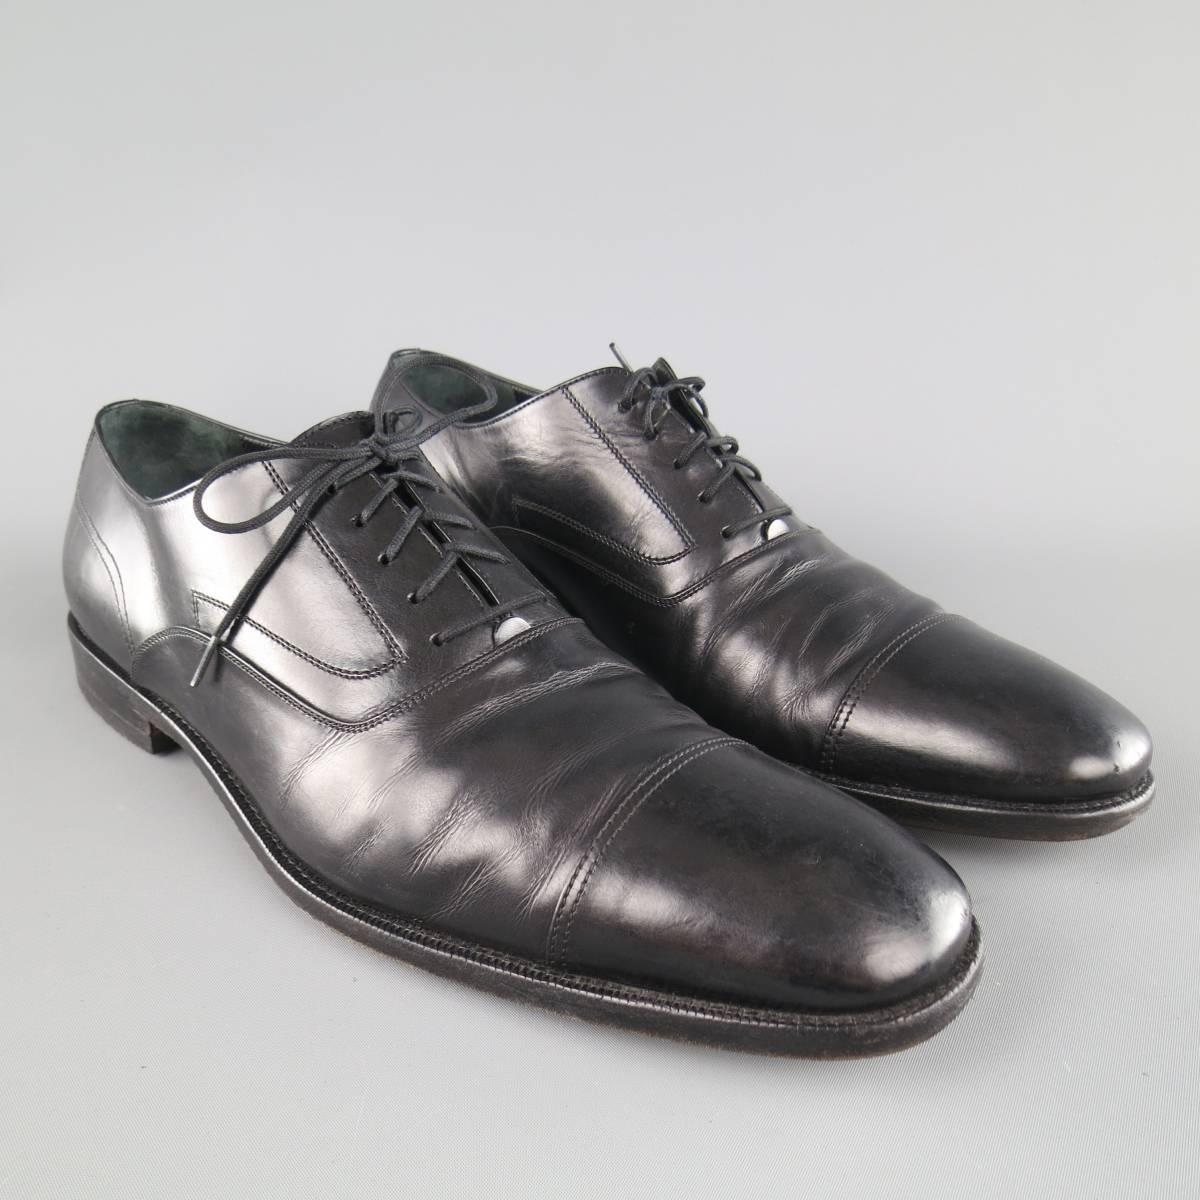 SALVATORE FERRAGAMO Lace Up Shoes consists of leather material in a black color tone. Detailed in a round, cap-toe front with tone-on-tone stitching along vamp. Leather sole with rubber heel. Made in Italy.
 
Fair Pre-Owned Condition
Marked Size: 11